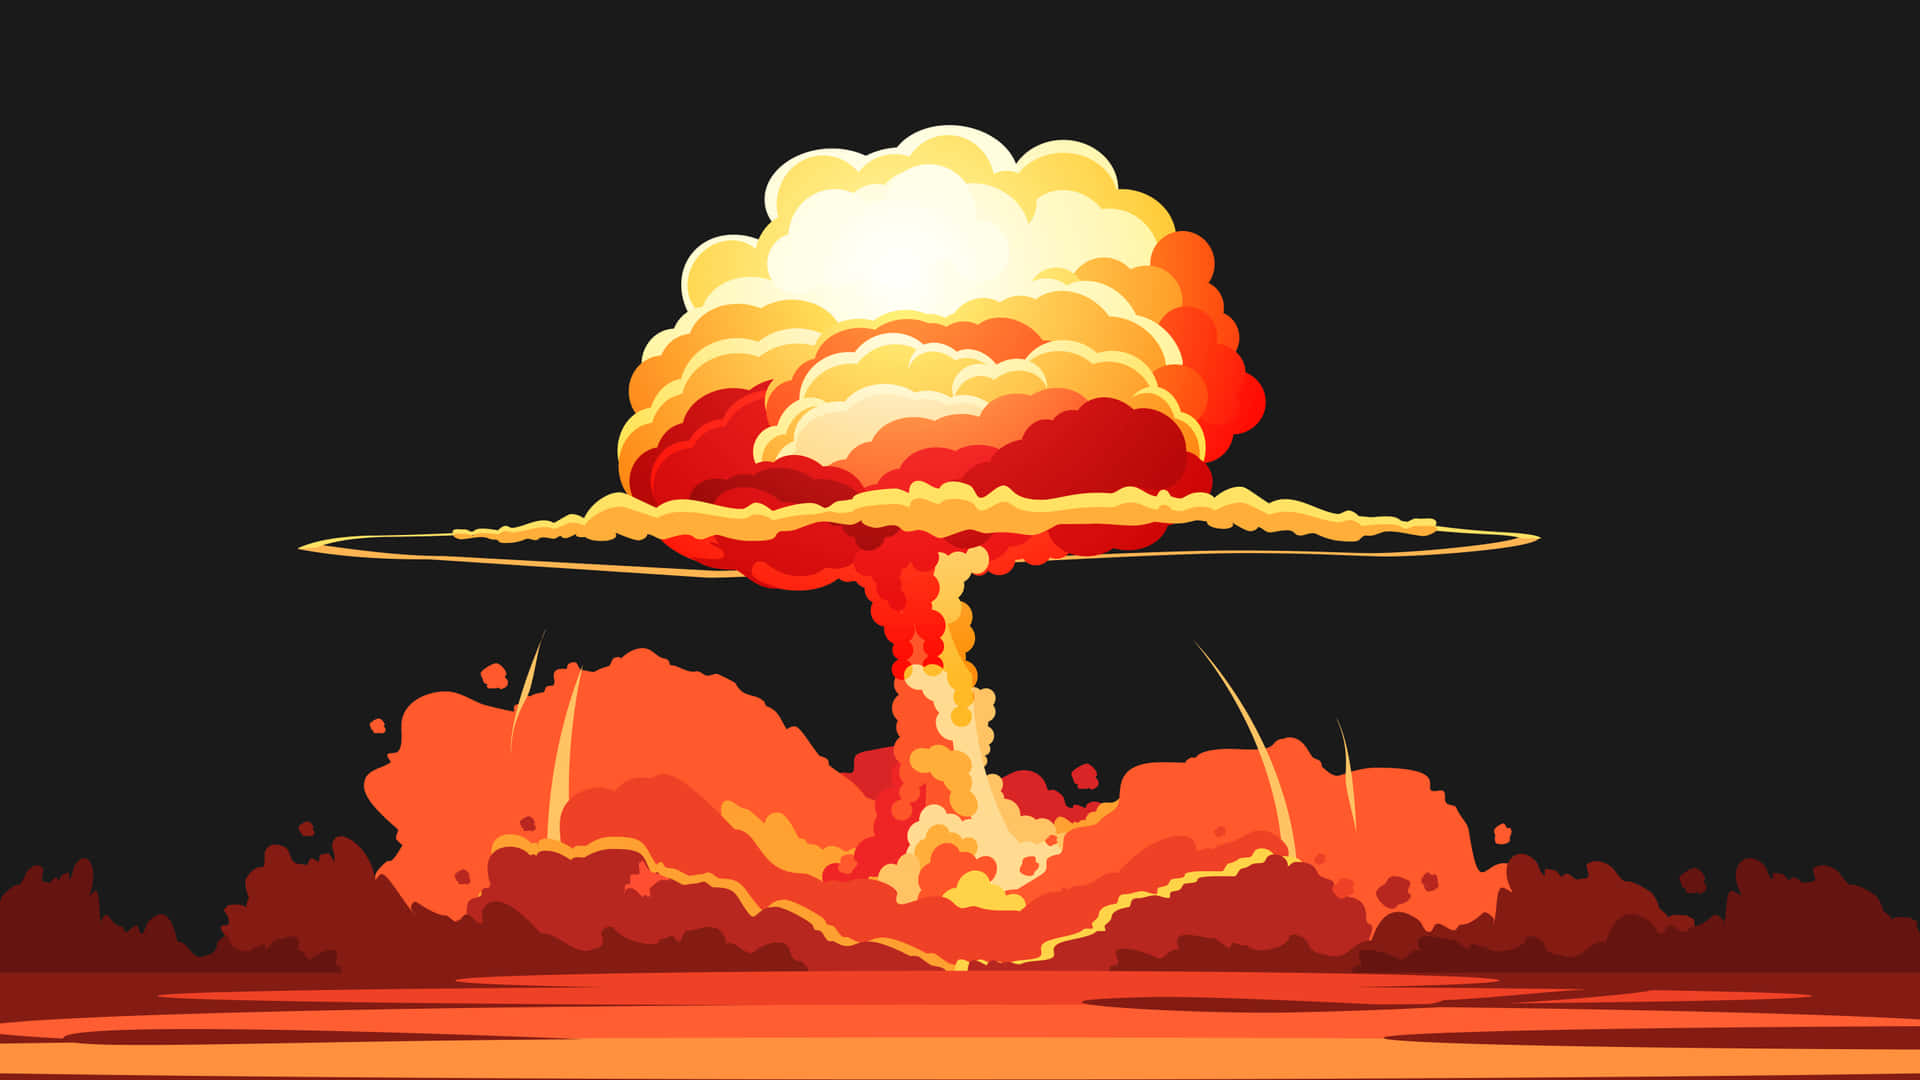 Nuclear Explosion Illustration Background